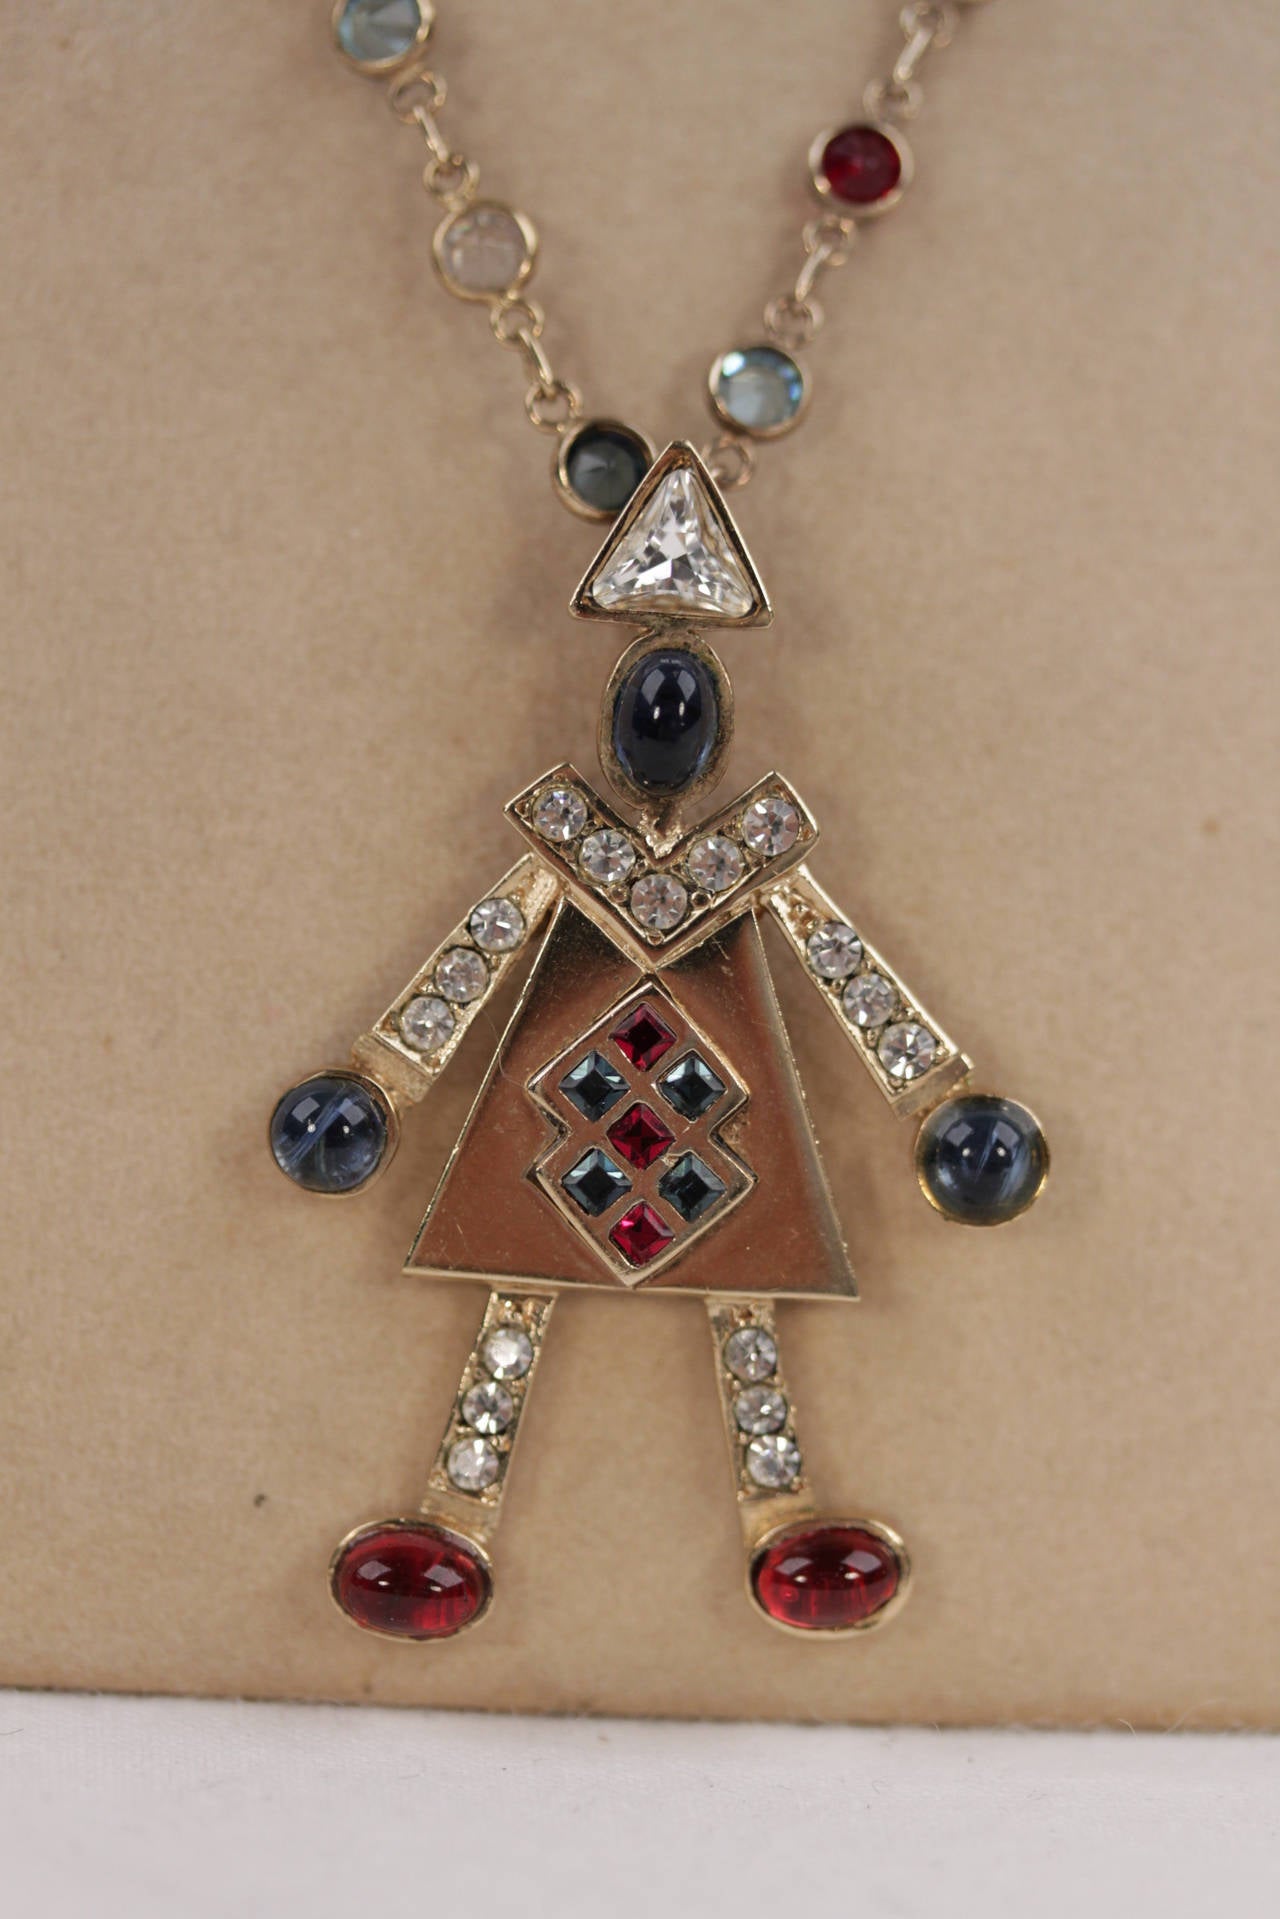 - Vintage Silver 800 chian with blue, red, light blue & white rhinestones

- Gold tone figure pendant with a white rhinestones and glass cabochon

- Clasp closure

- Engraved '800' hallmark on the chain - Total lenght: 16 inches - 40,5